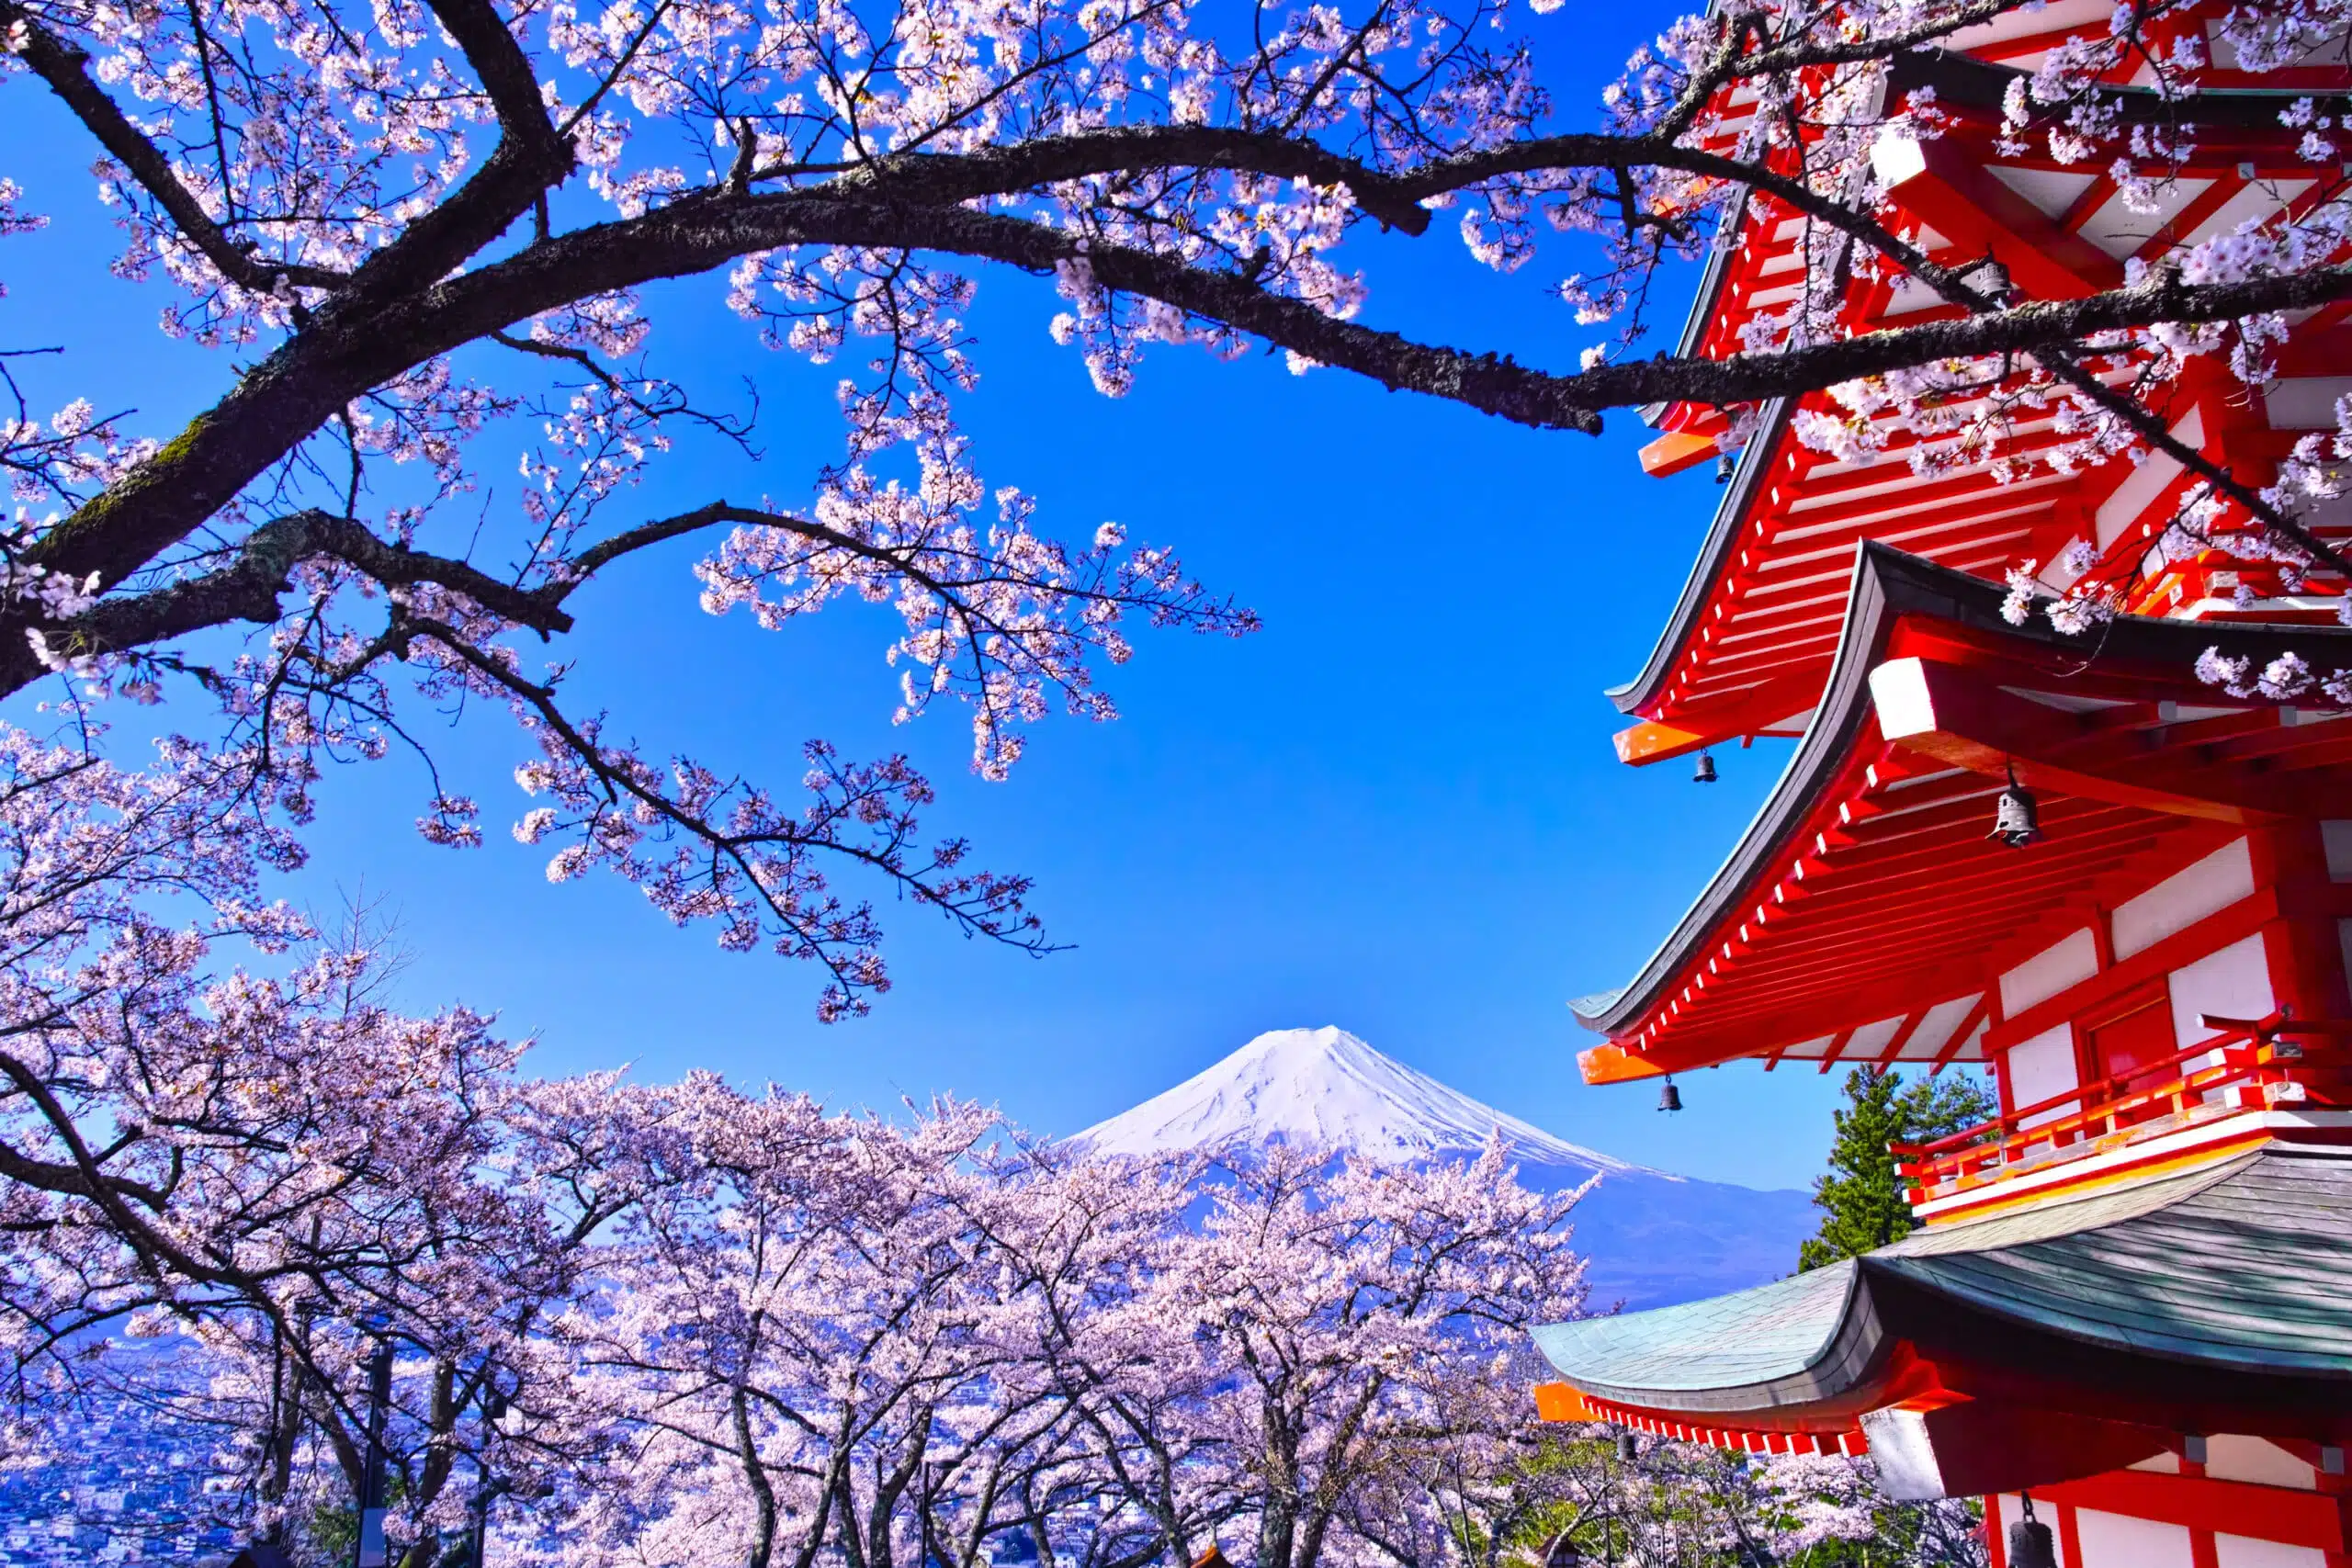 Cherry blossom trees against the azure sky and red pagoda